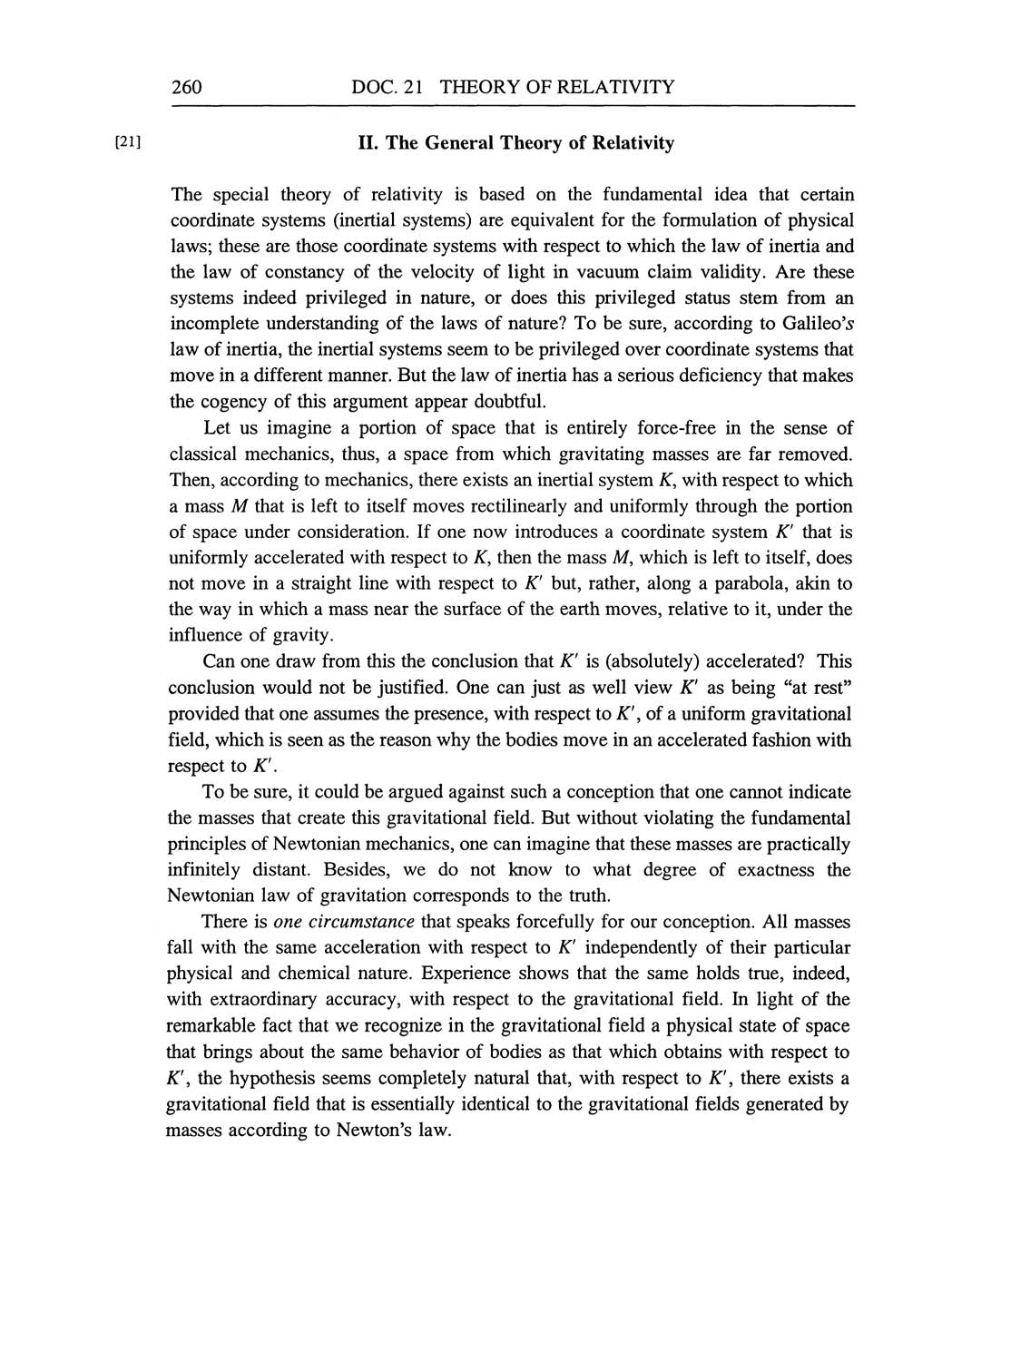 Volume 4: The Swiss Years: Writings 1912-1914 (English translation supplement) page 260